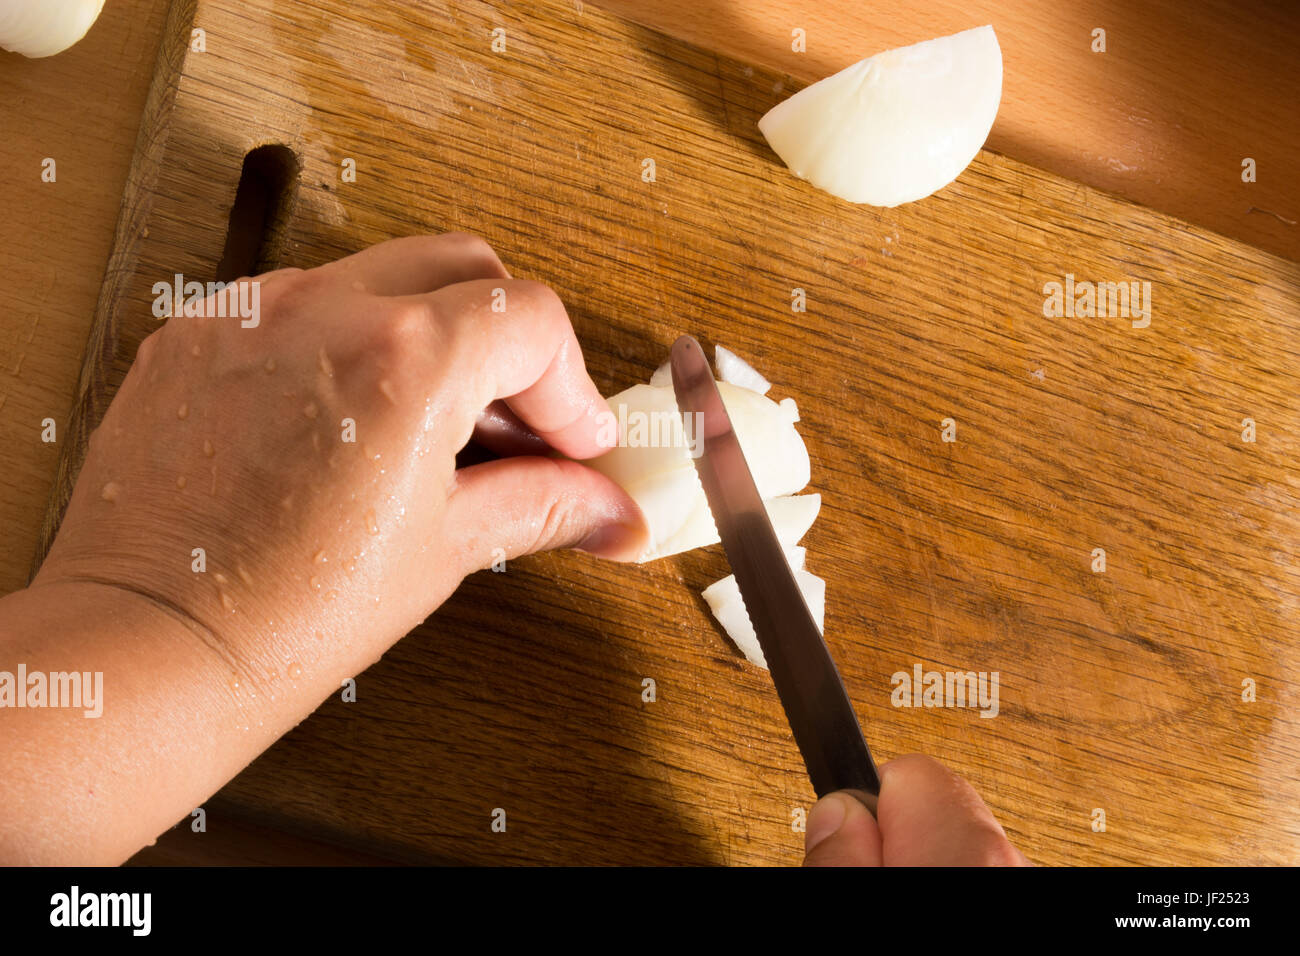 Cutting and chopping an onion Stock Photo